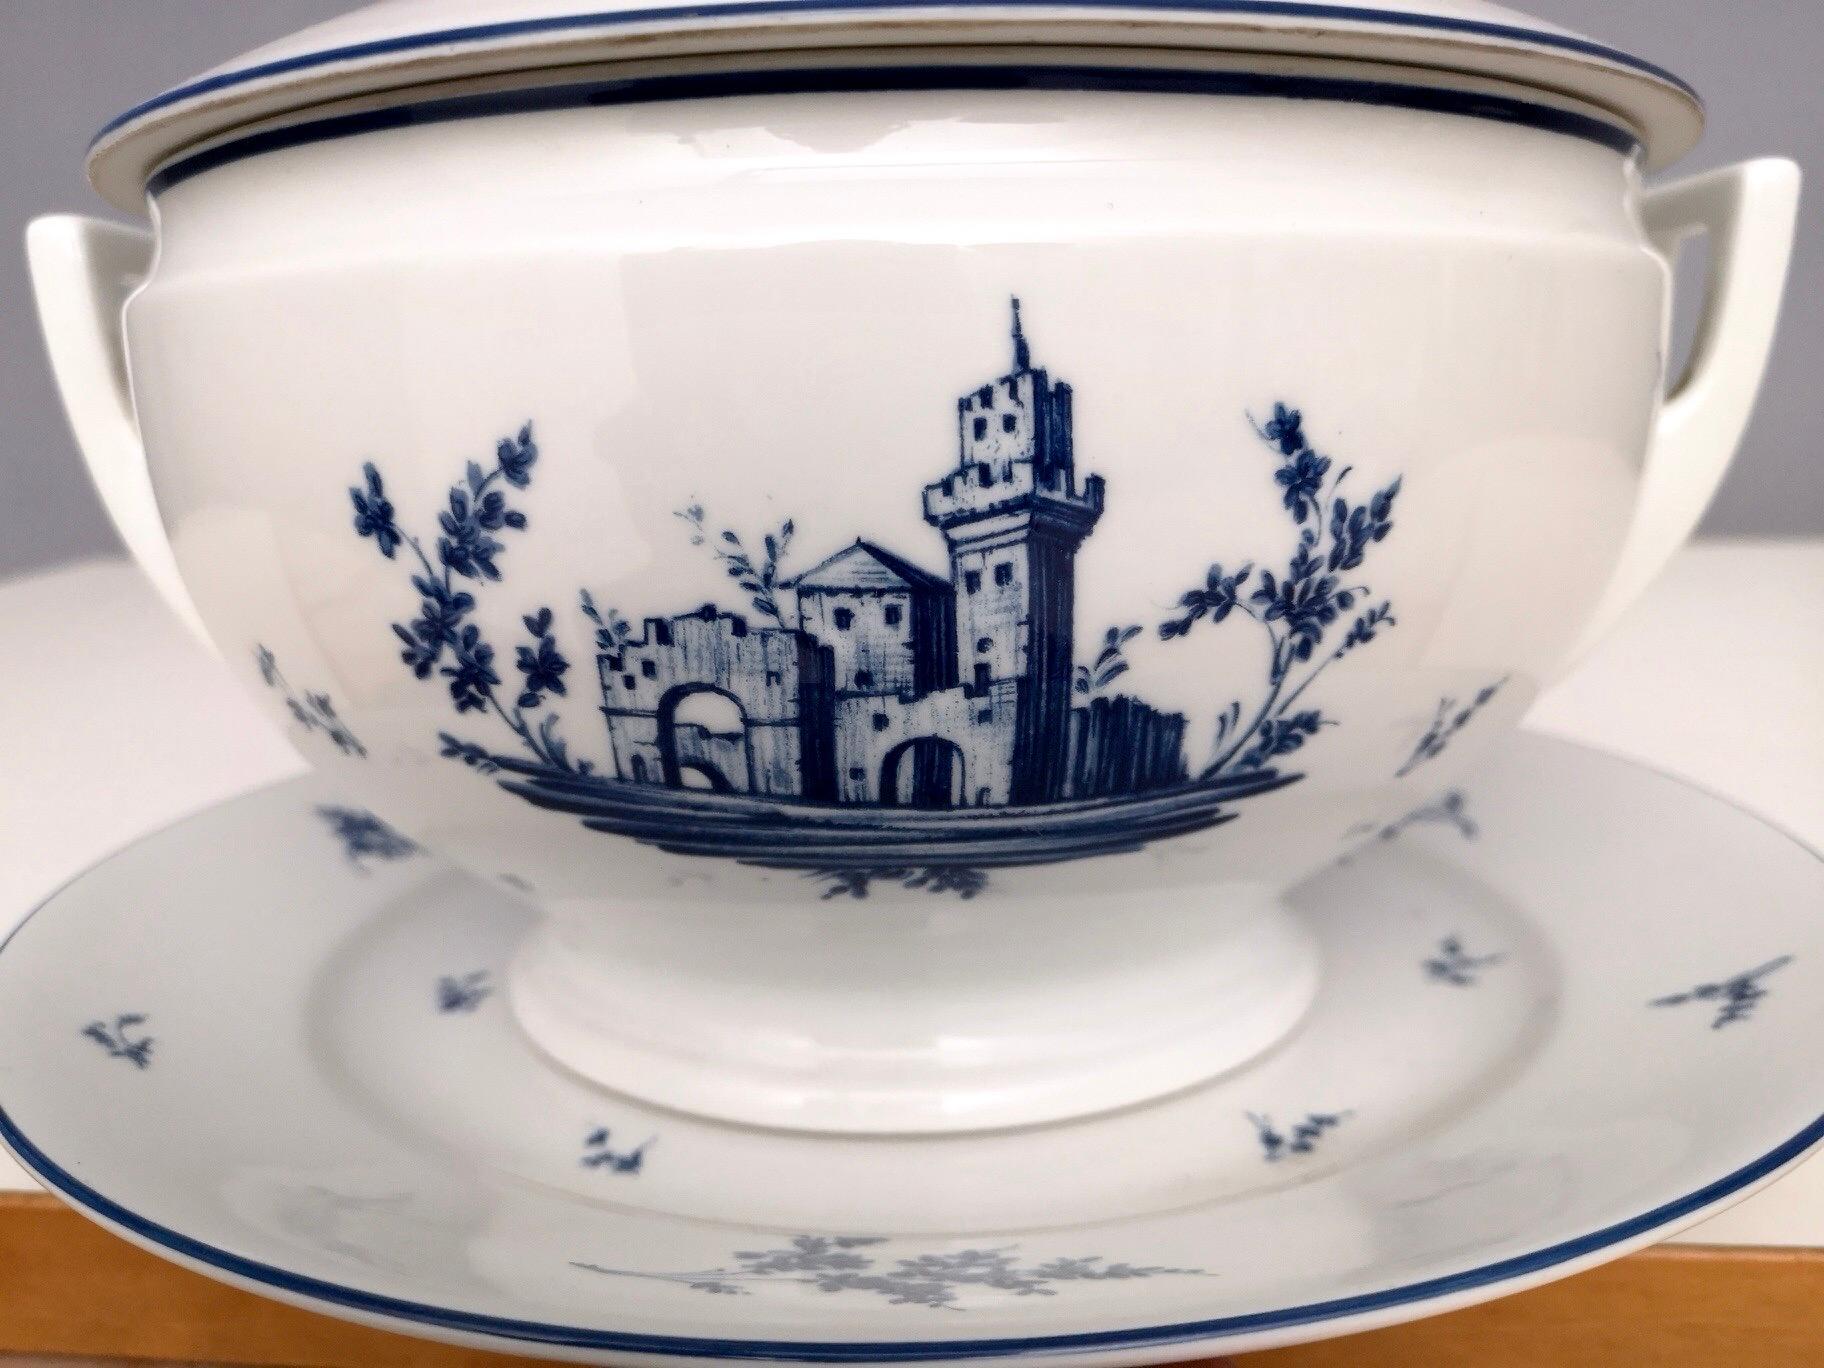 Neoclassical Richard Ginori White and Blue Porcelain Serving Dish, Italy For Sale 3